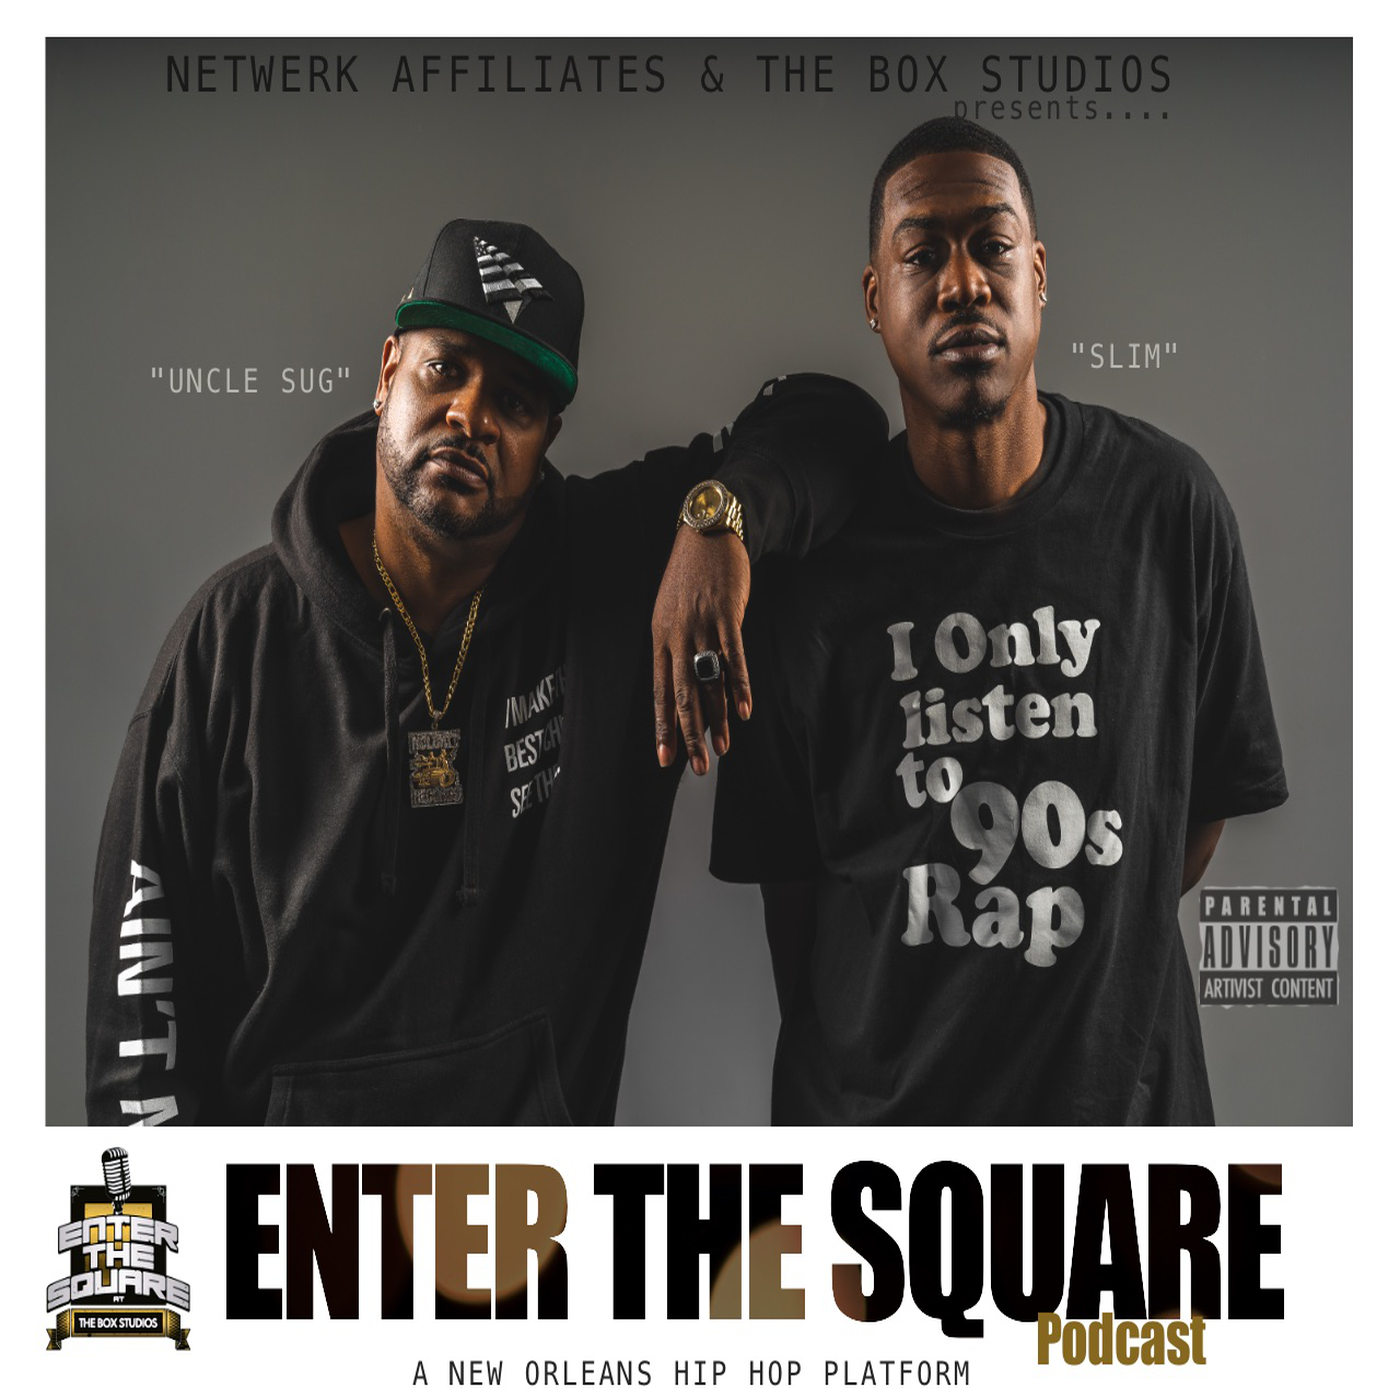 ENTER THE SQUARE podcast